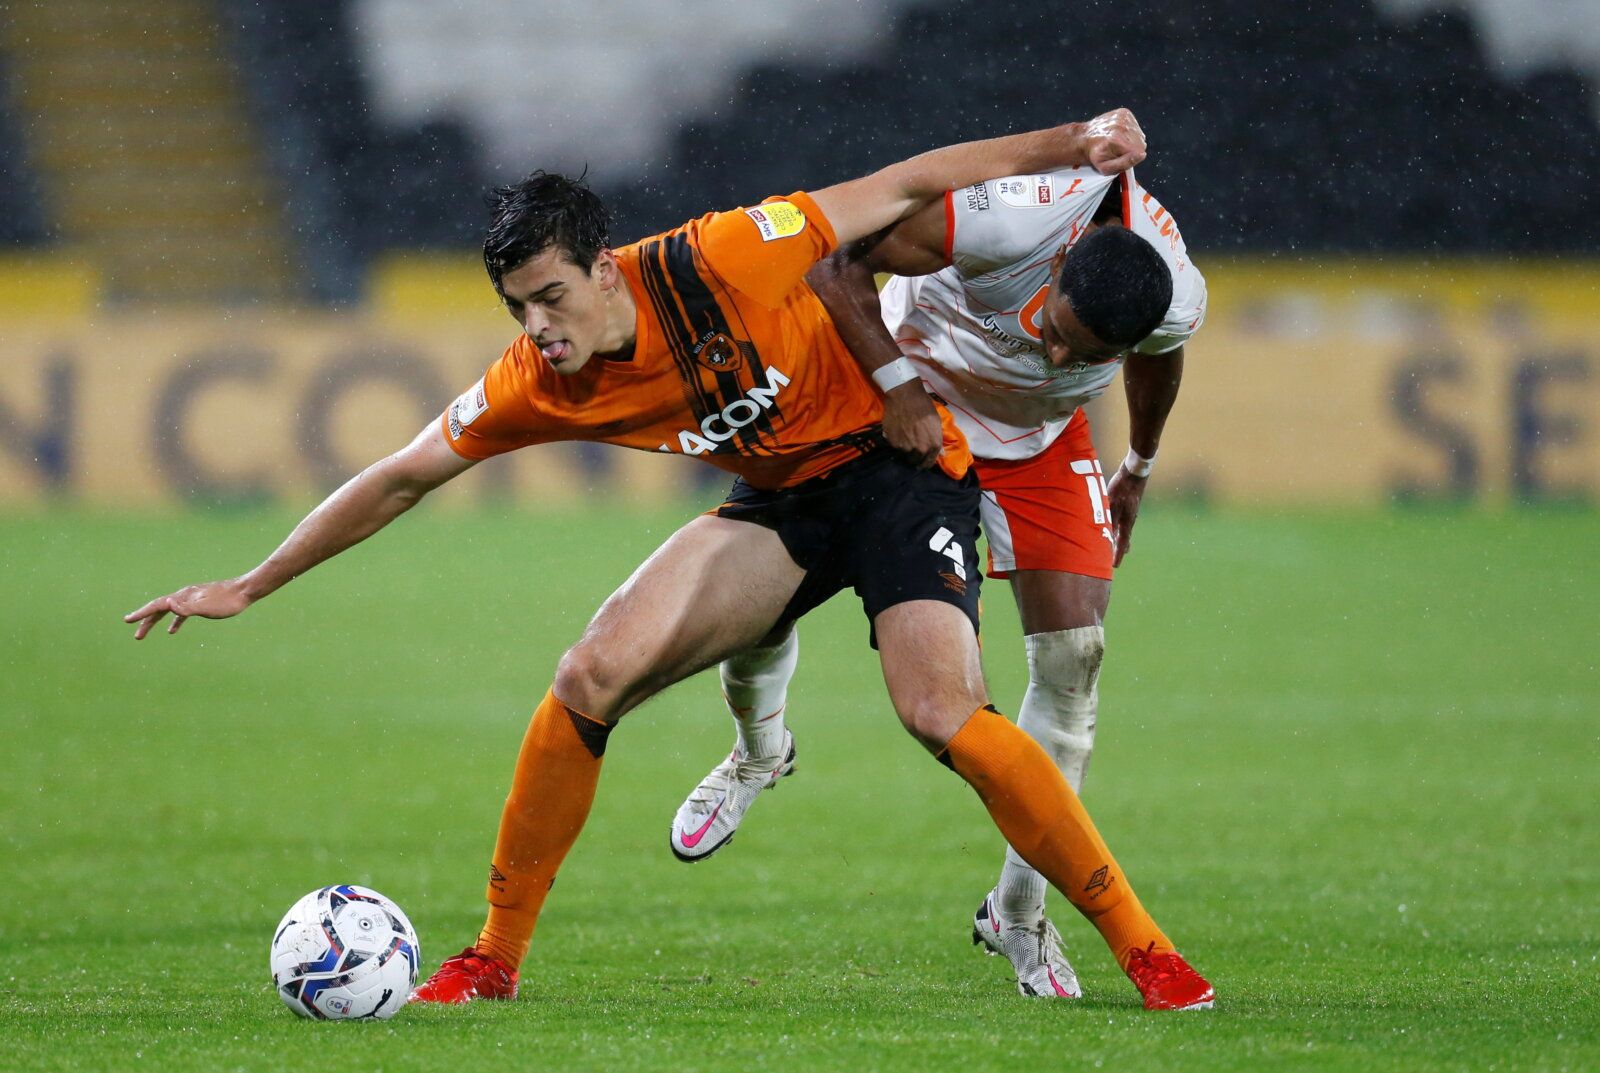 Soccer Football - Championship - Hull City v Blackpool - KCOM Stadium, Hull, Britain - September 28, 2021  Hull City's Jacob Greaves in action with Blackpool's Demetri Mitchell  Action Images/Ed Sykes  EDITORIAL USE ONLY. No use with unauthorized audio, video, data, fixture lists, club/league logos or 